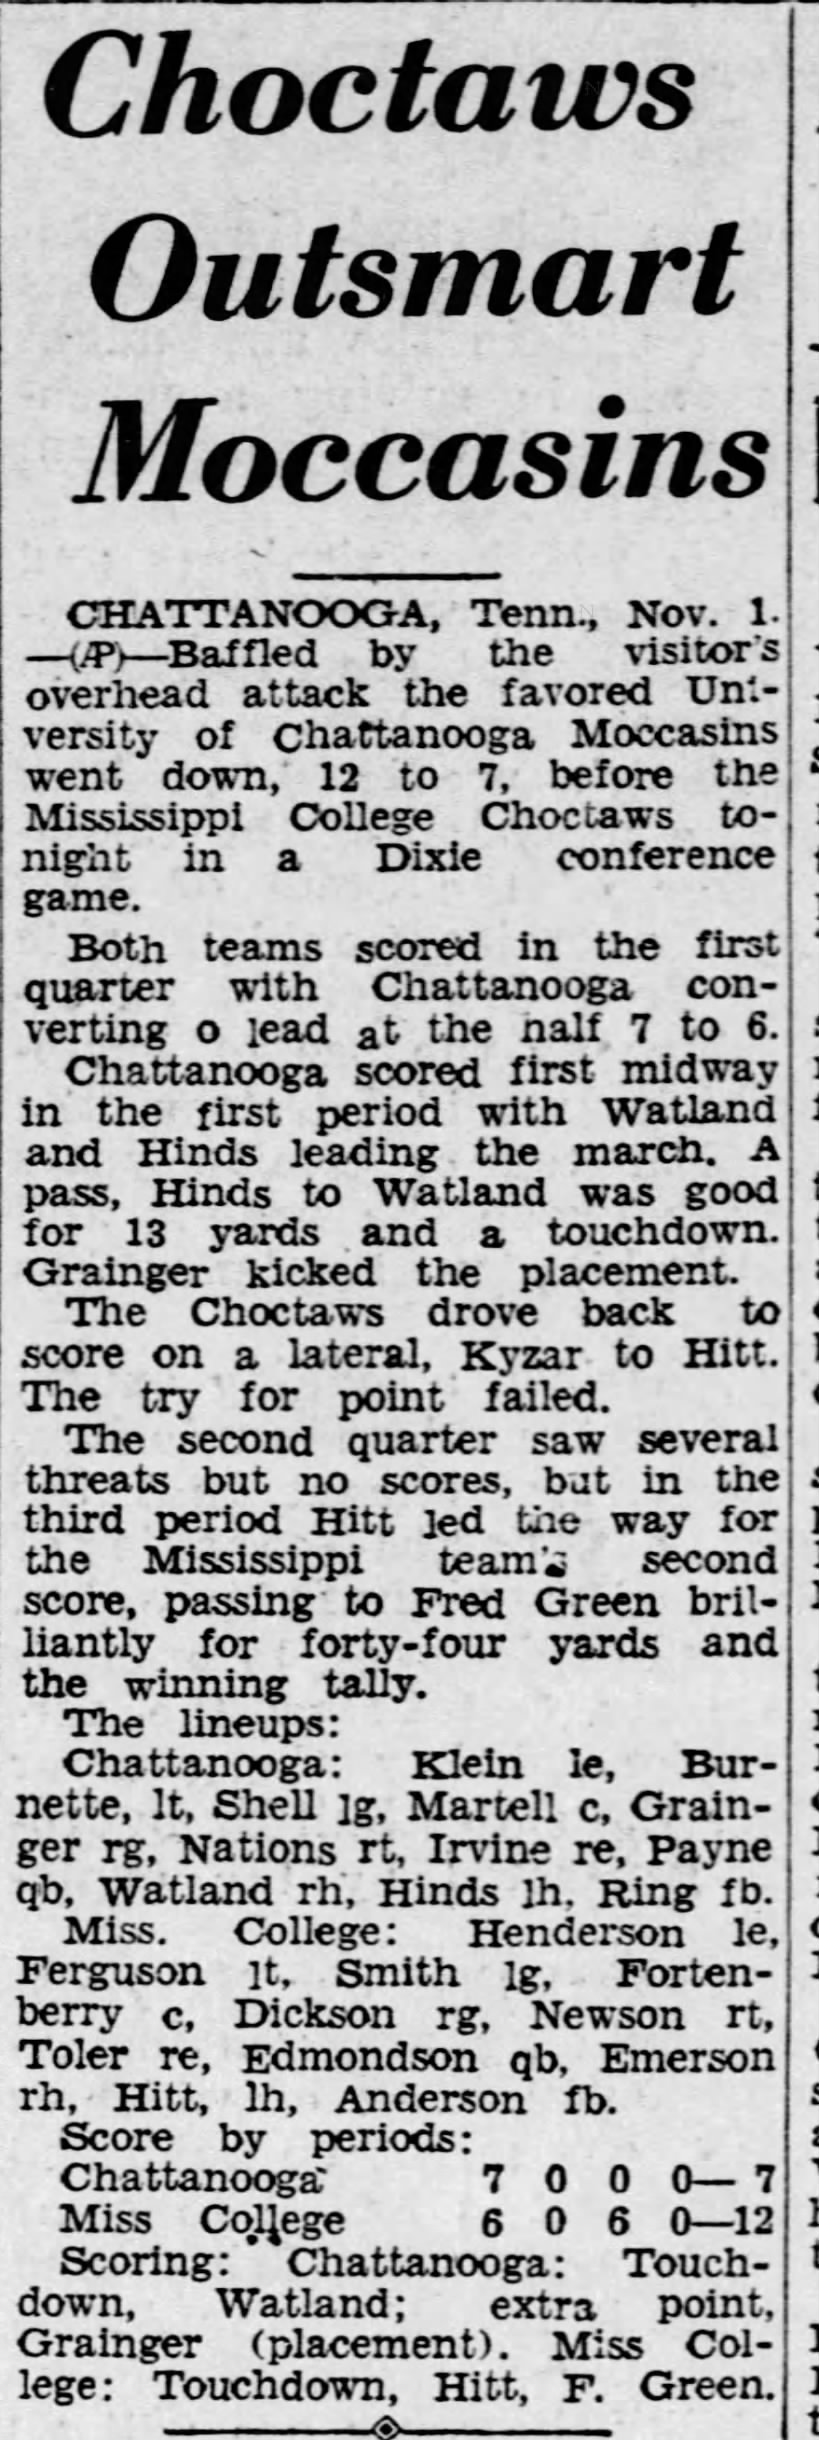 Choctaws outsmart Moccasins